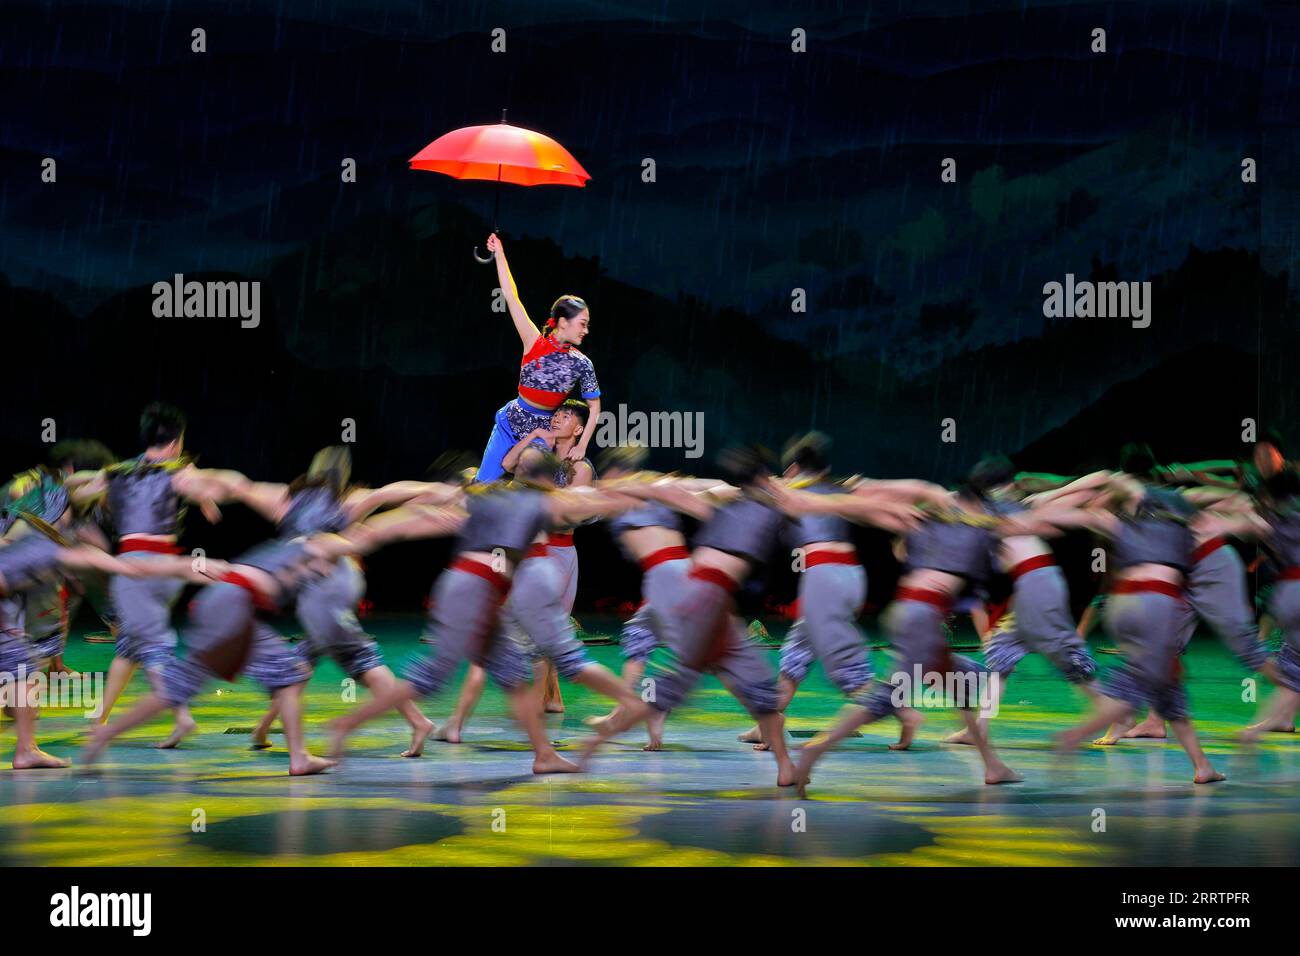 230804 -- CHENGDU, Aug. 4, 2023 -- Artists perform during one of the shows themed Be Together at the Village of the 31st FISU Summer World University Games in Chengdu, southwest China s Sichuan Province, Aug. 4, 2023.  Chengdu UniversiadeCHINA-CHENGDU-WORLD UNIVERSITY GAMES-PERFORMANCE CN ShenxBohan PUBLICATIONxNOTxINxCHN Stock Photo